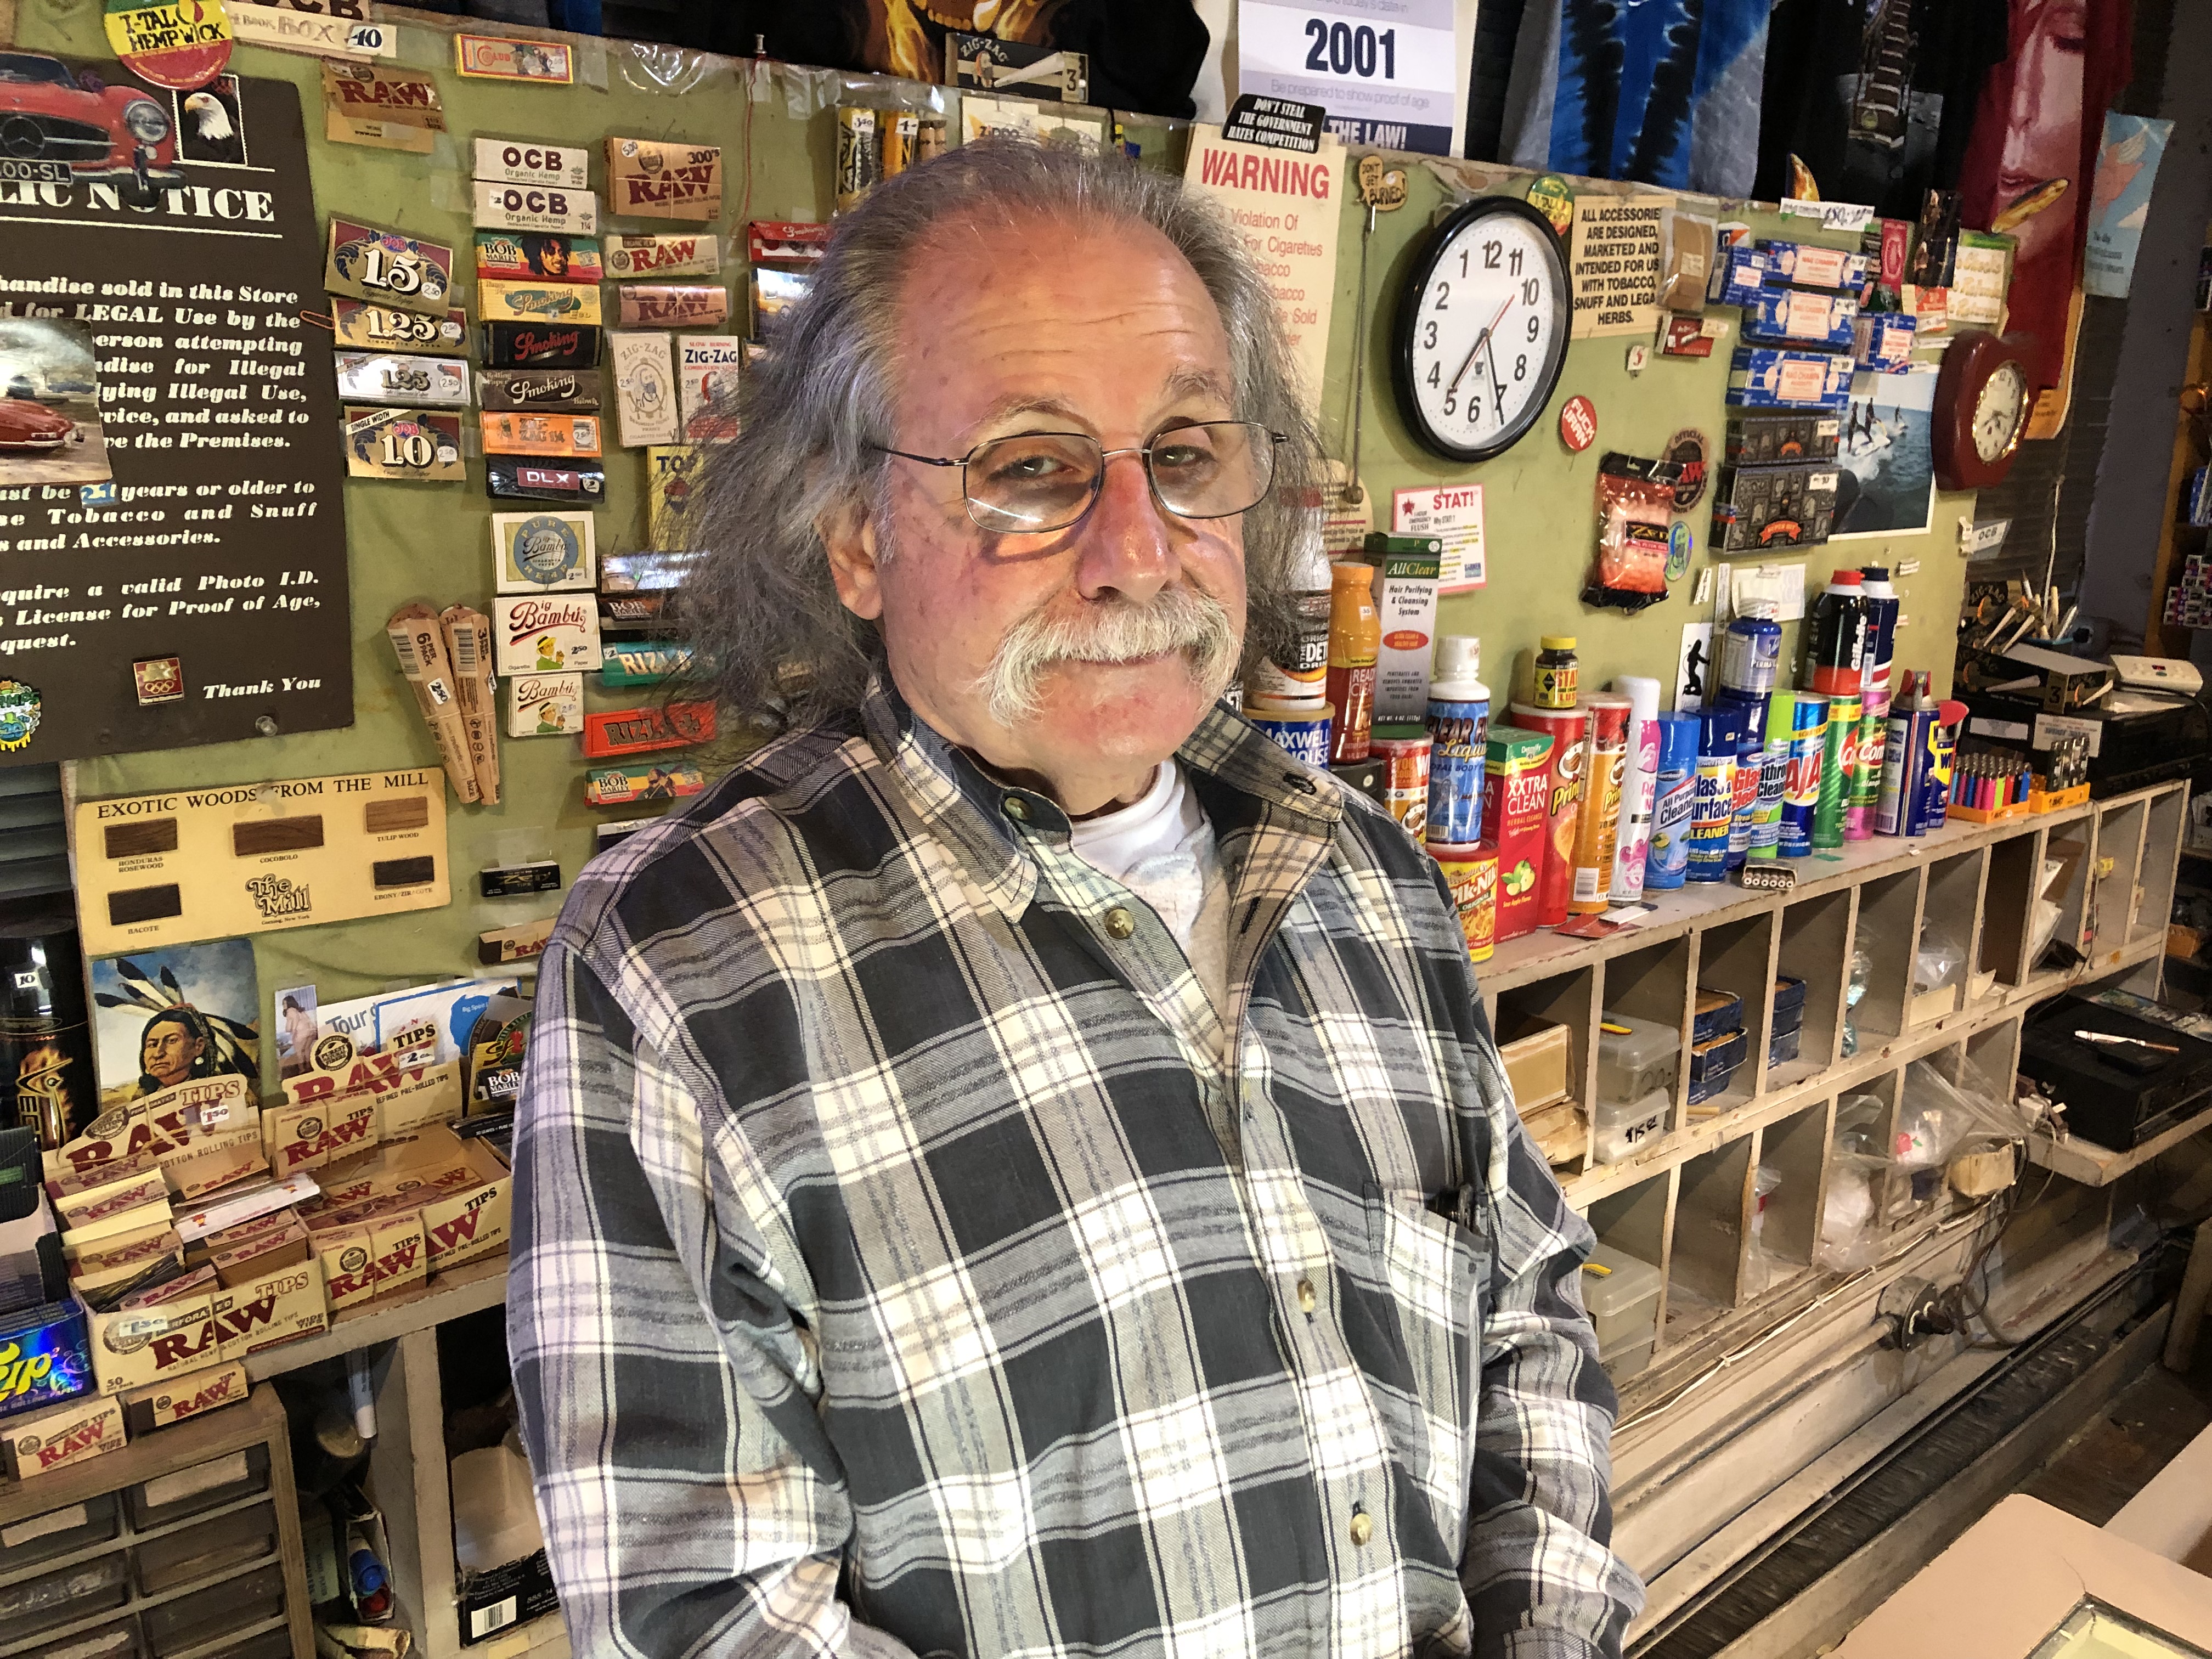 It was 1969 when Shelly Miller began operating the Adam’s Apple, now one of the nation’s oldest head shops, selling “smoking accessories” in an era in which marijuana was illegal. He’s closing the place for good on Jan. 31.